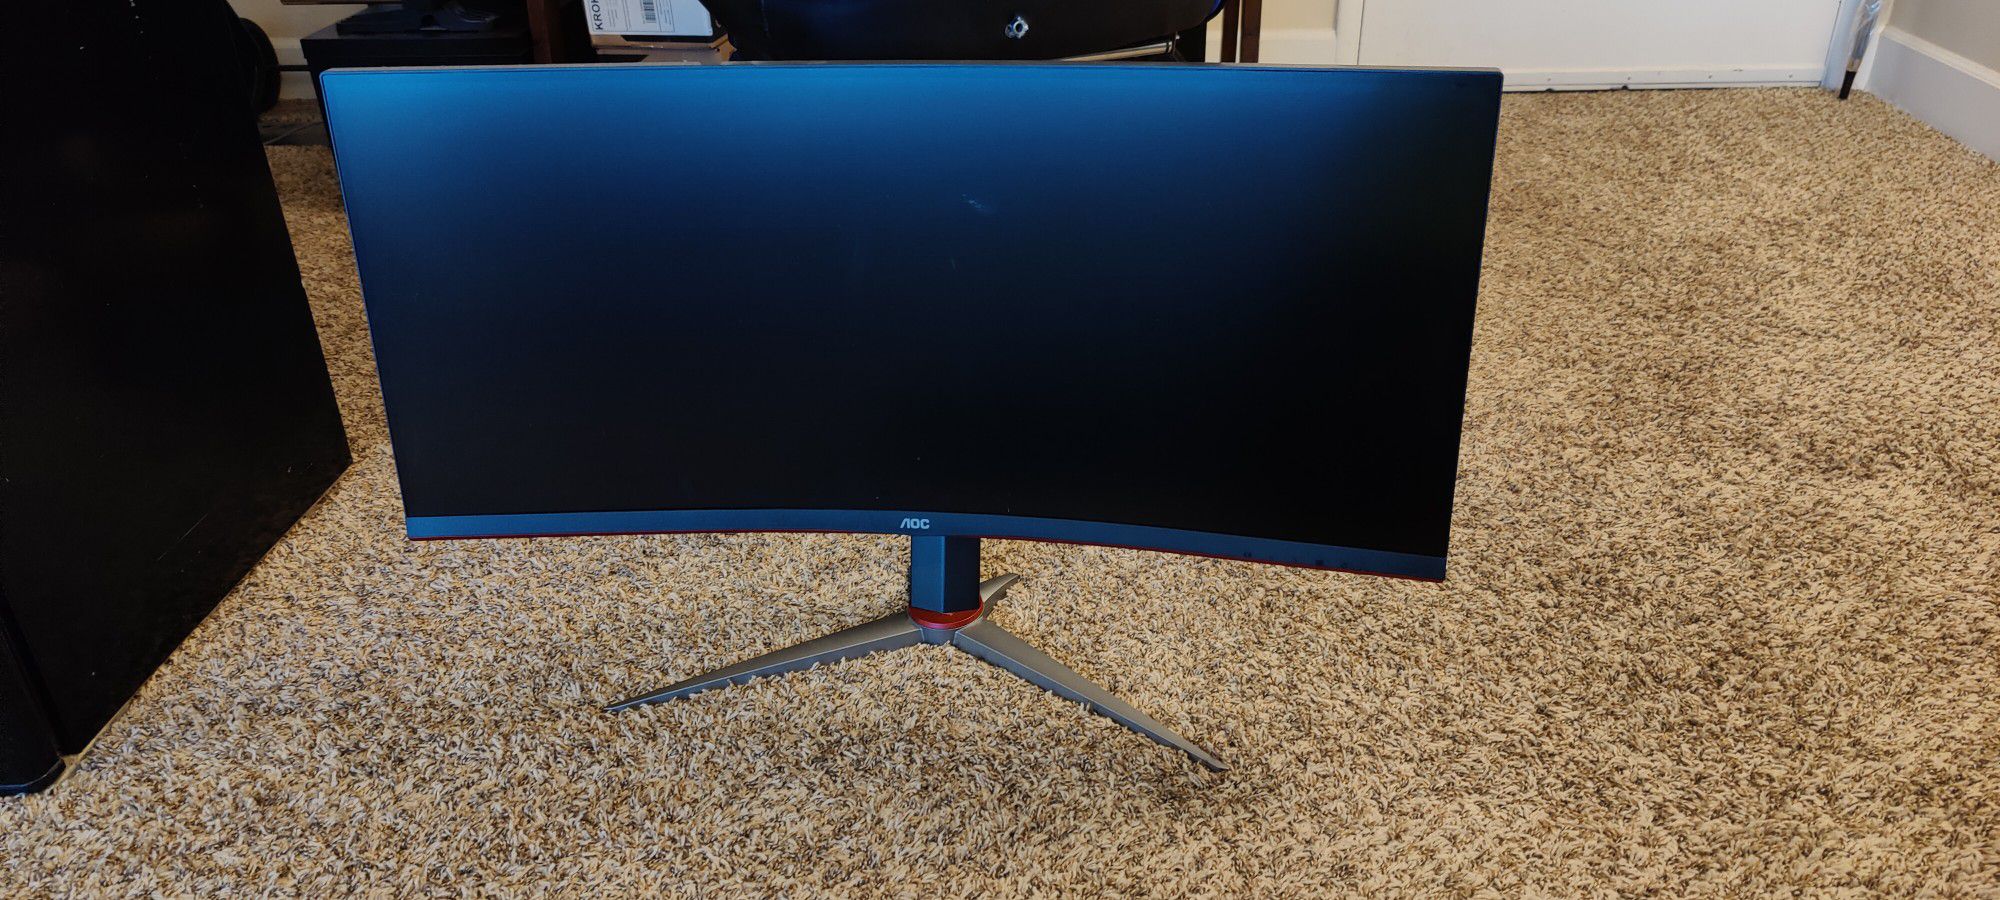 AOC Ultrawide 34" Curved Gaming Monitor 144hz Refresh Rate, 3440x1440